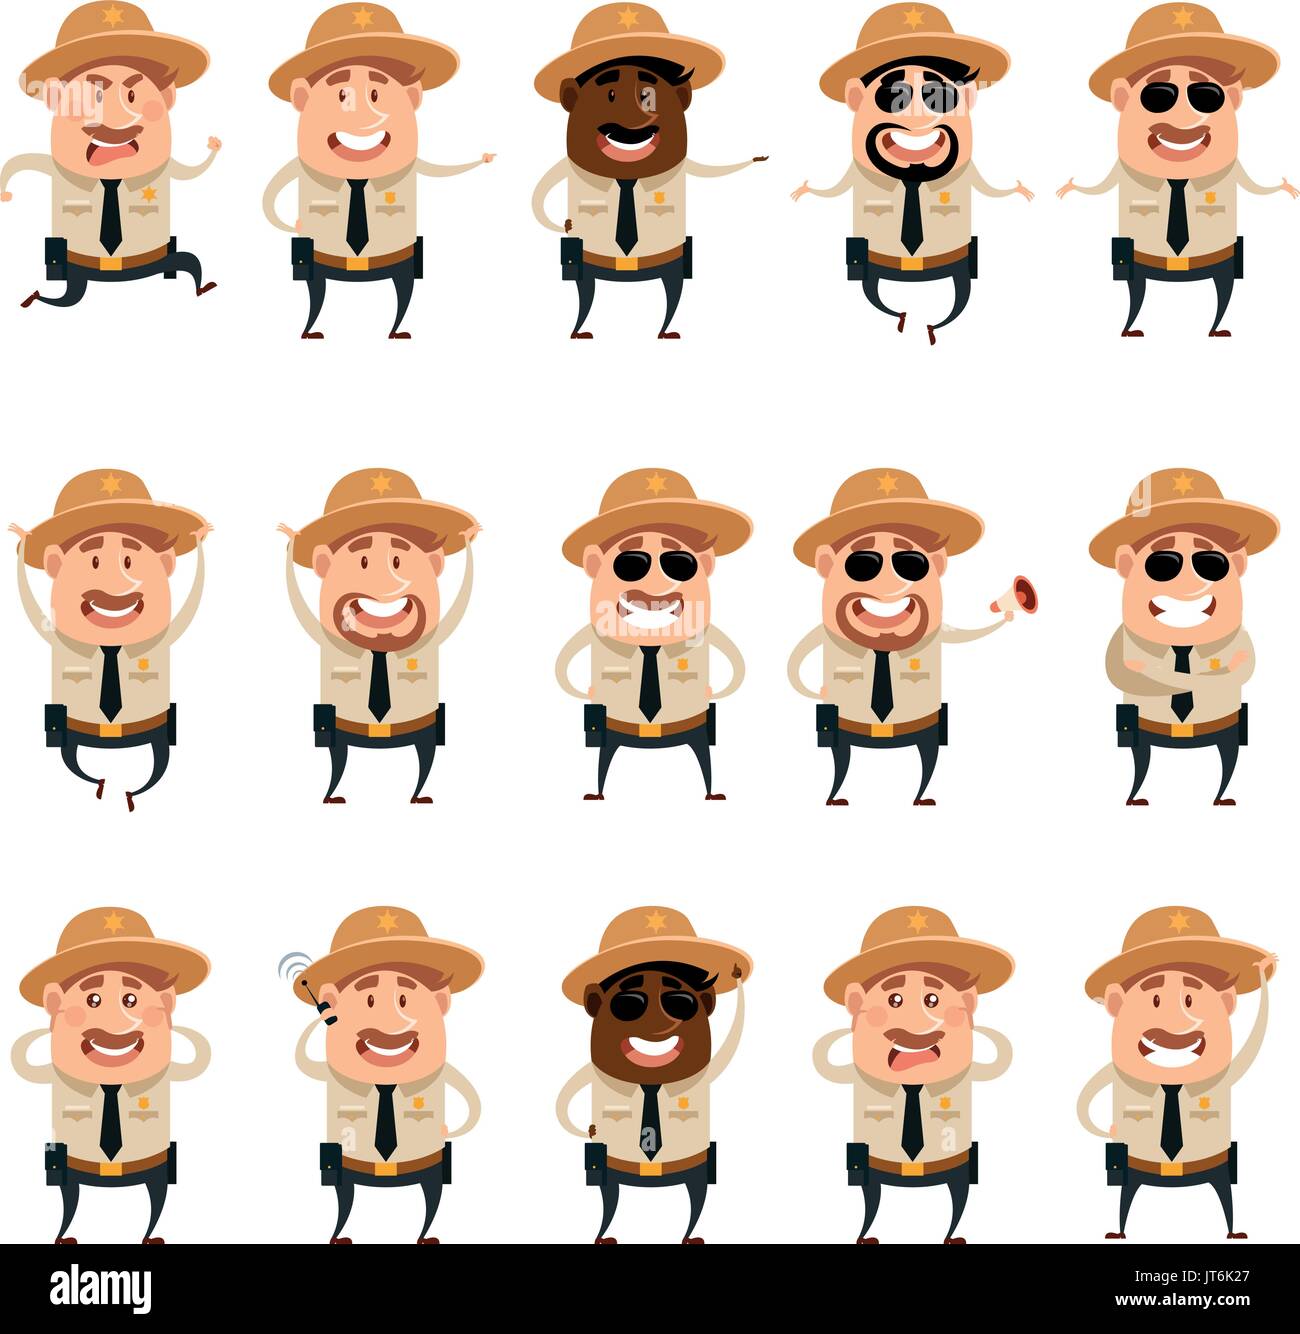 Set of flat police men icons Stock Vector